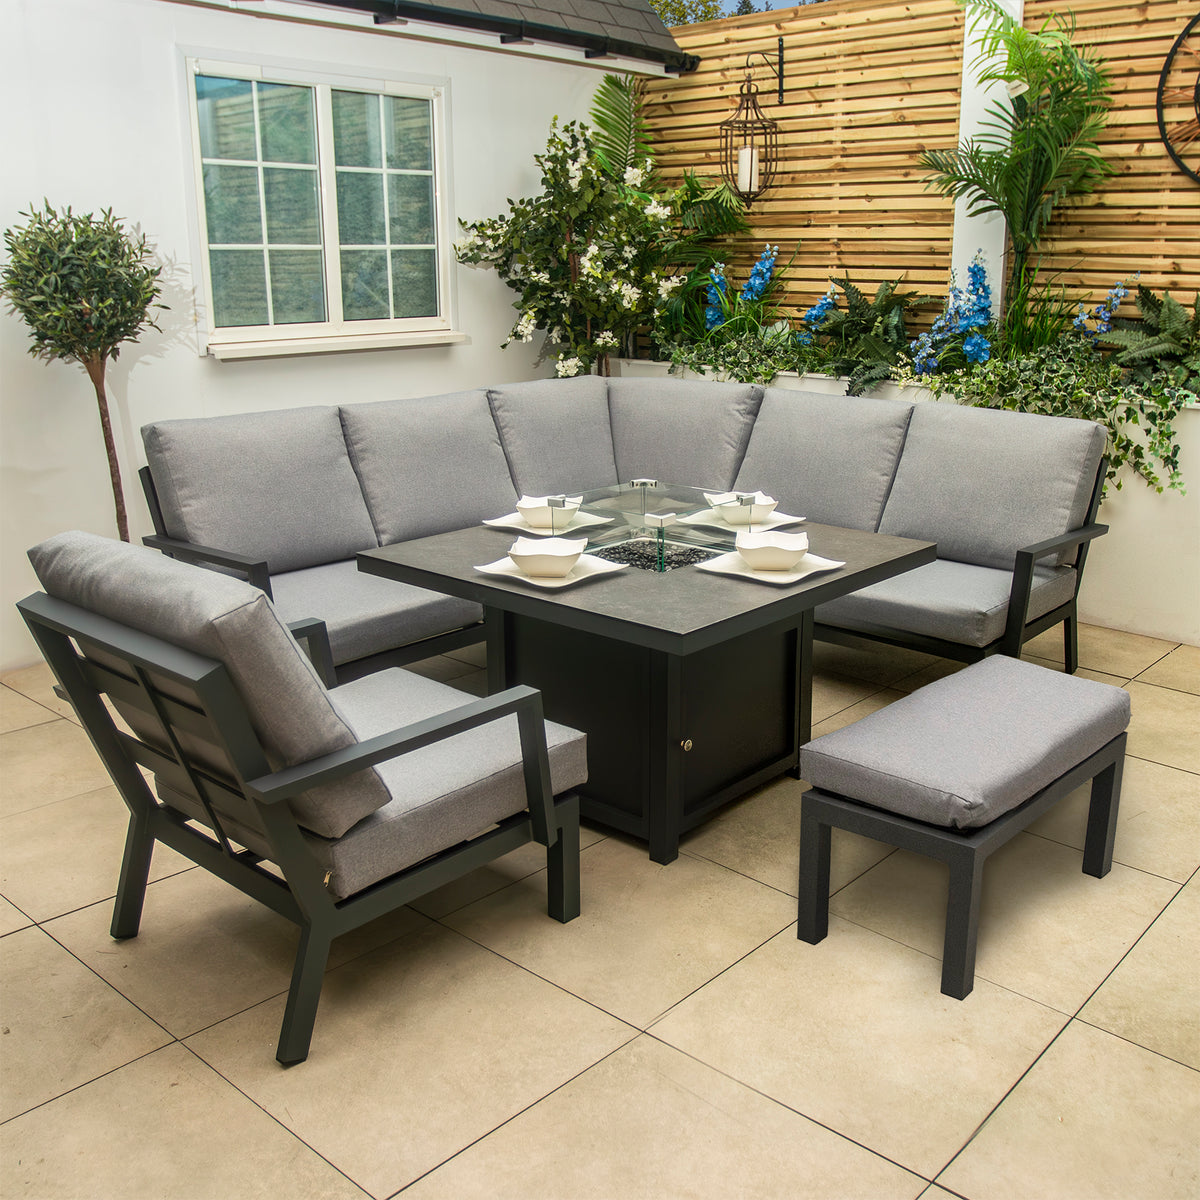 Bracken Outdoors Miami Dark Aluminium Compact Corner Set with Fire Pit Table and Bench and Arm Chair